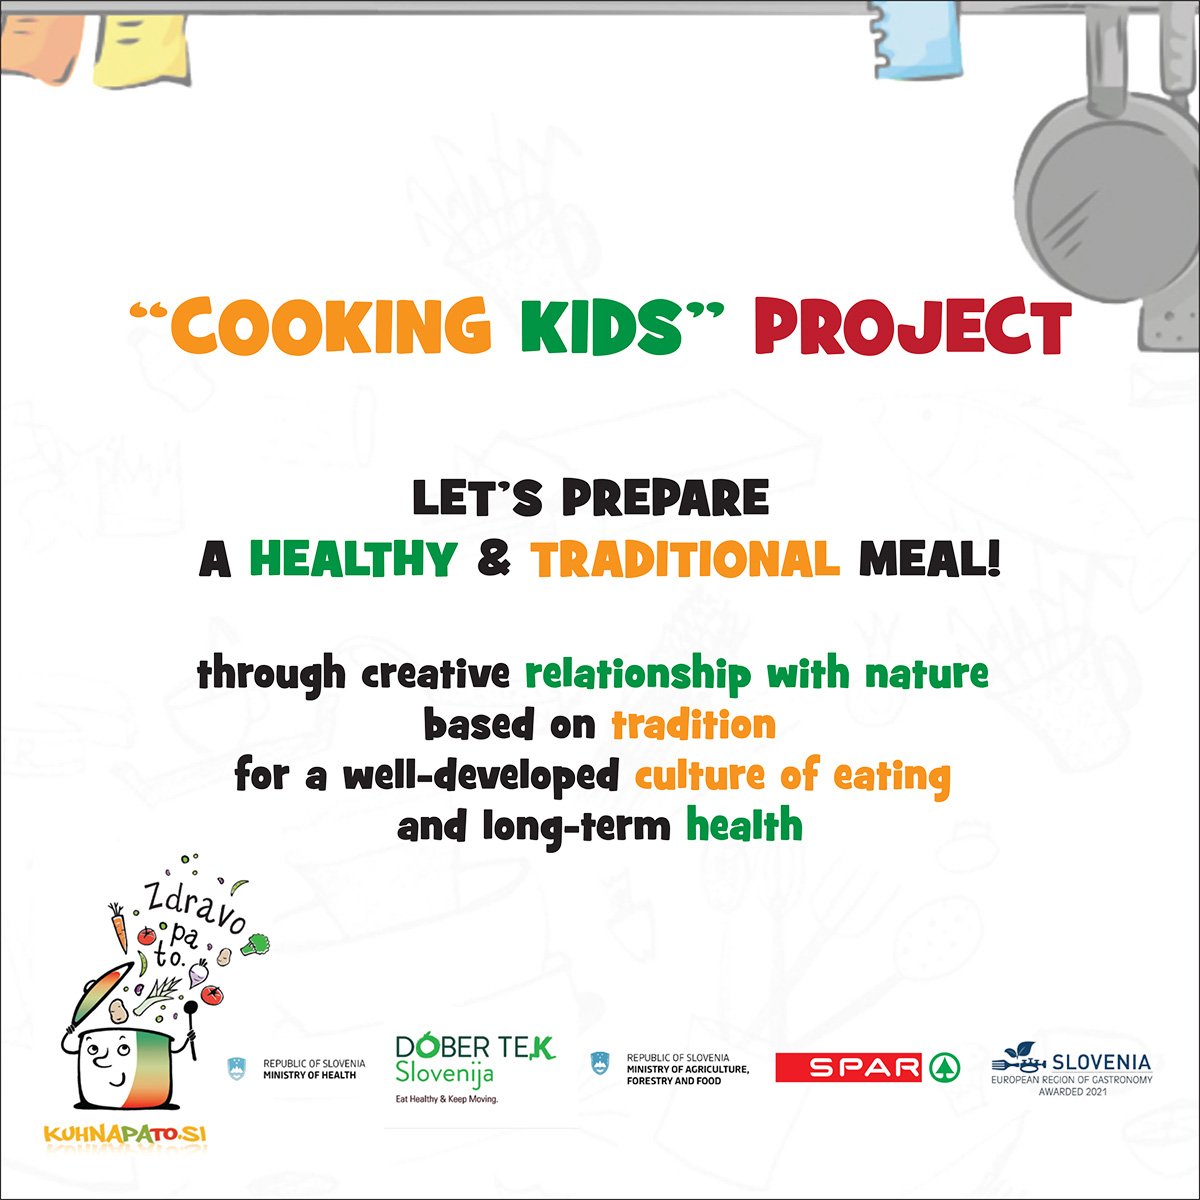 Cooking kids project